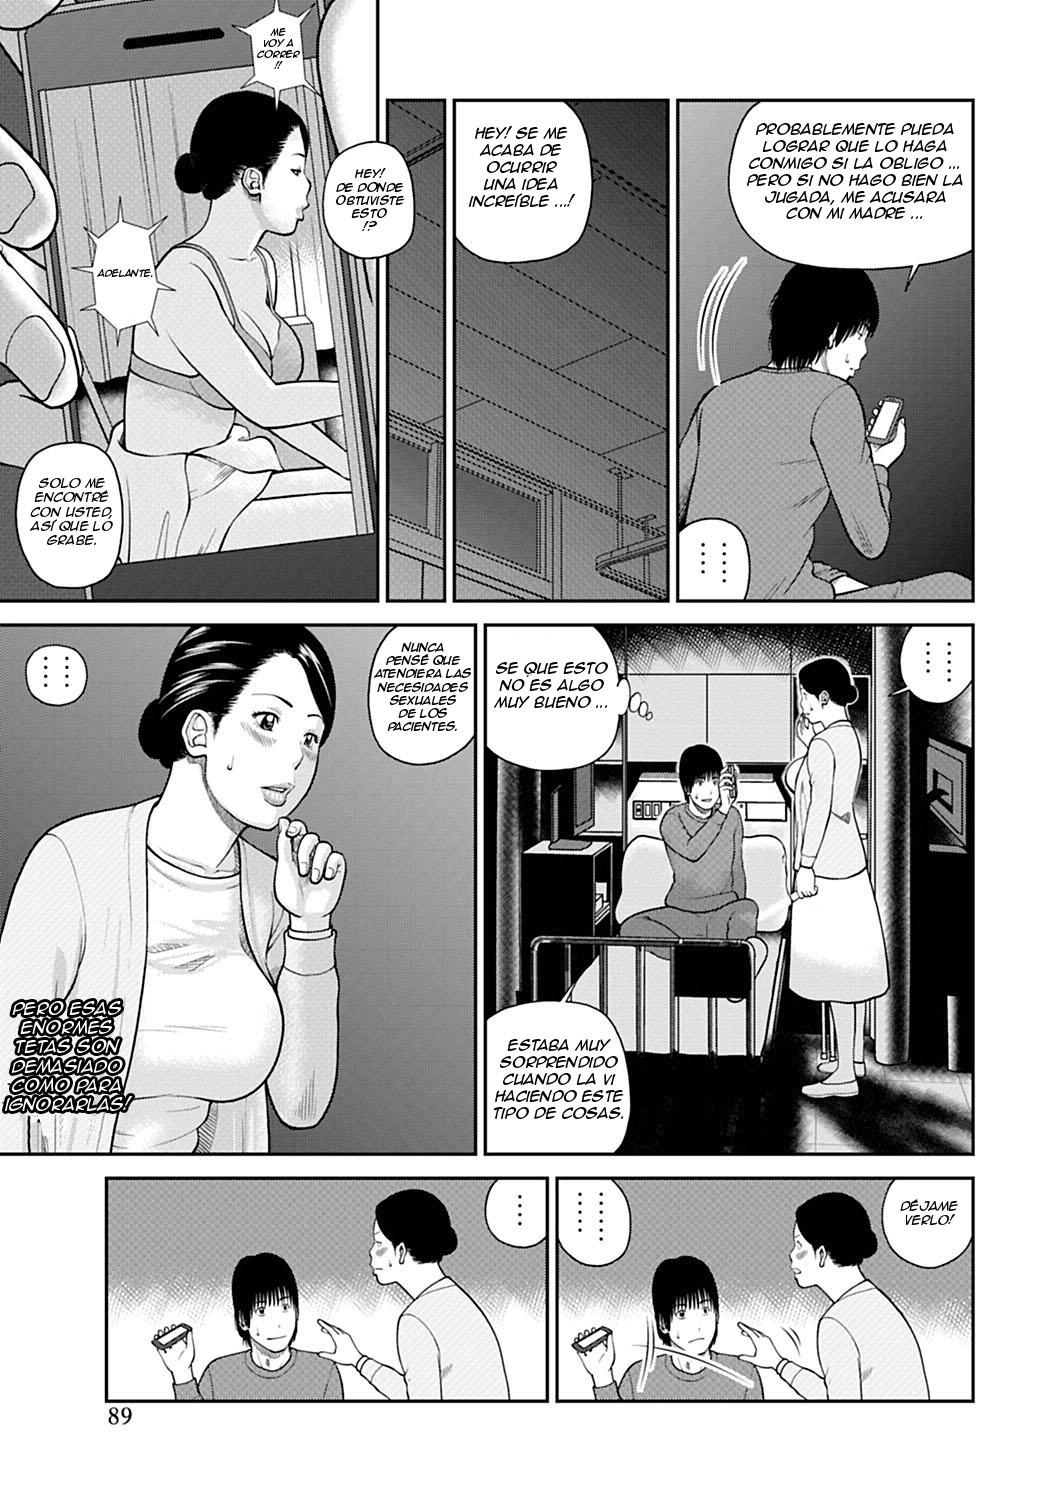 34 Year Old Begging Wife Ch. 1-5 (Sin Censura) Chapter-5 - 6